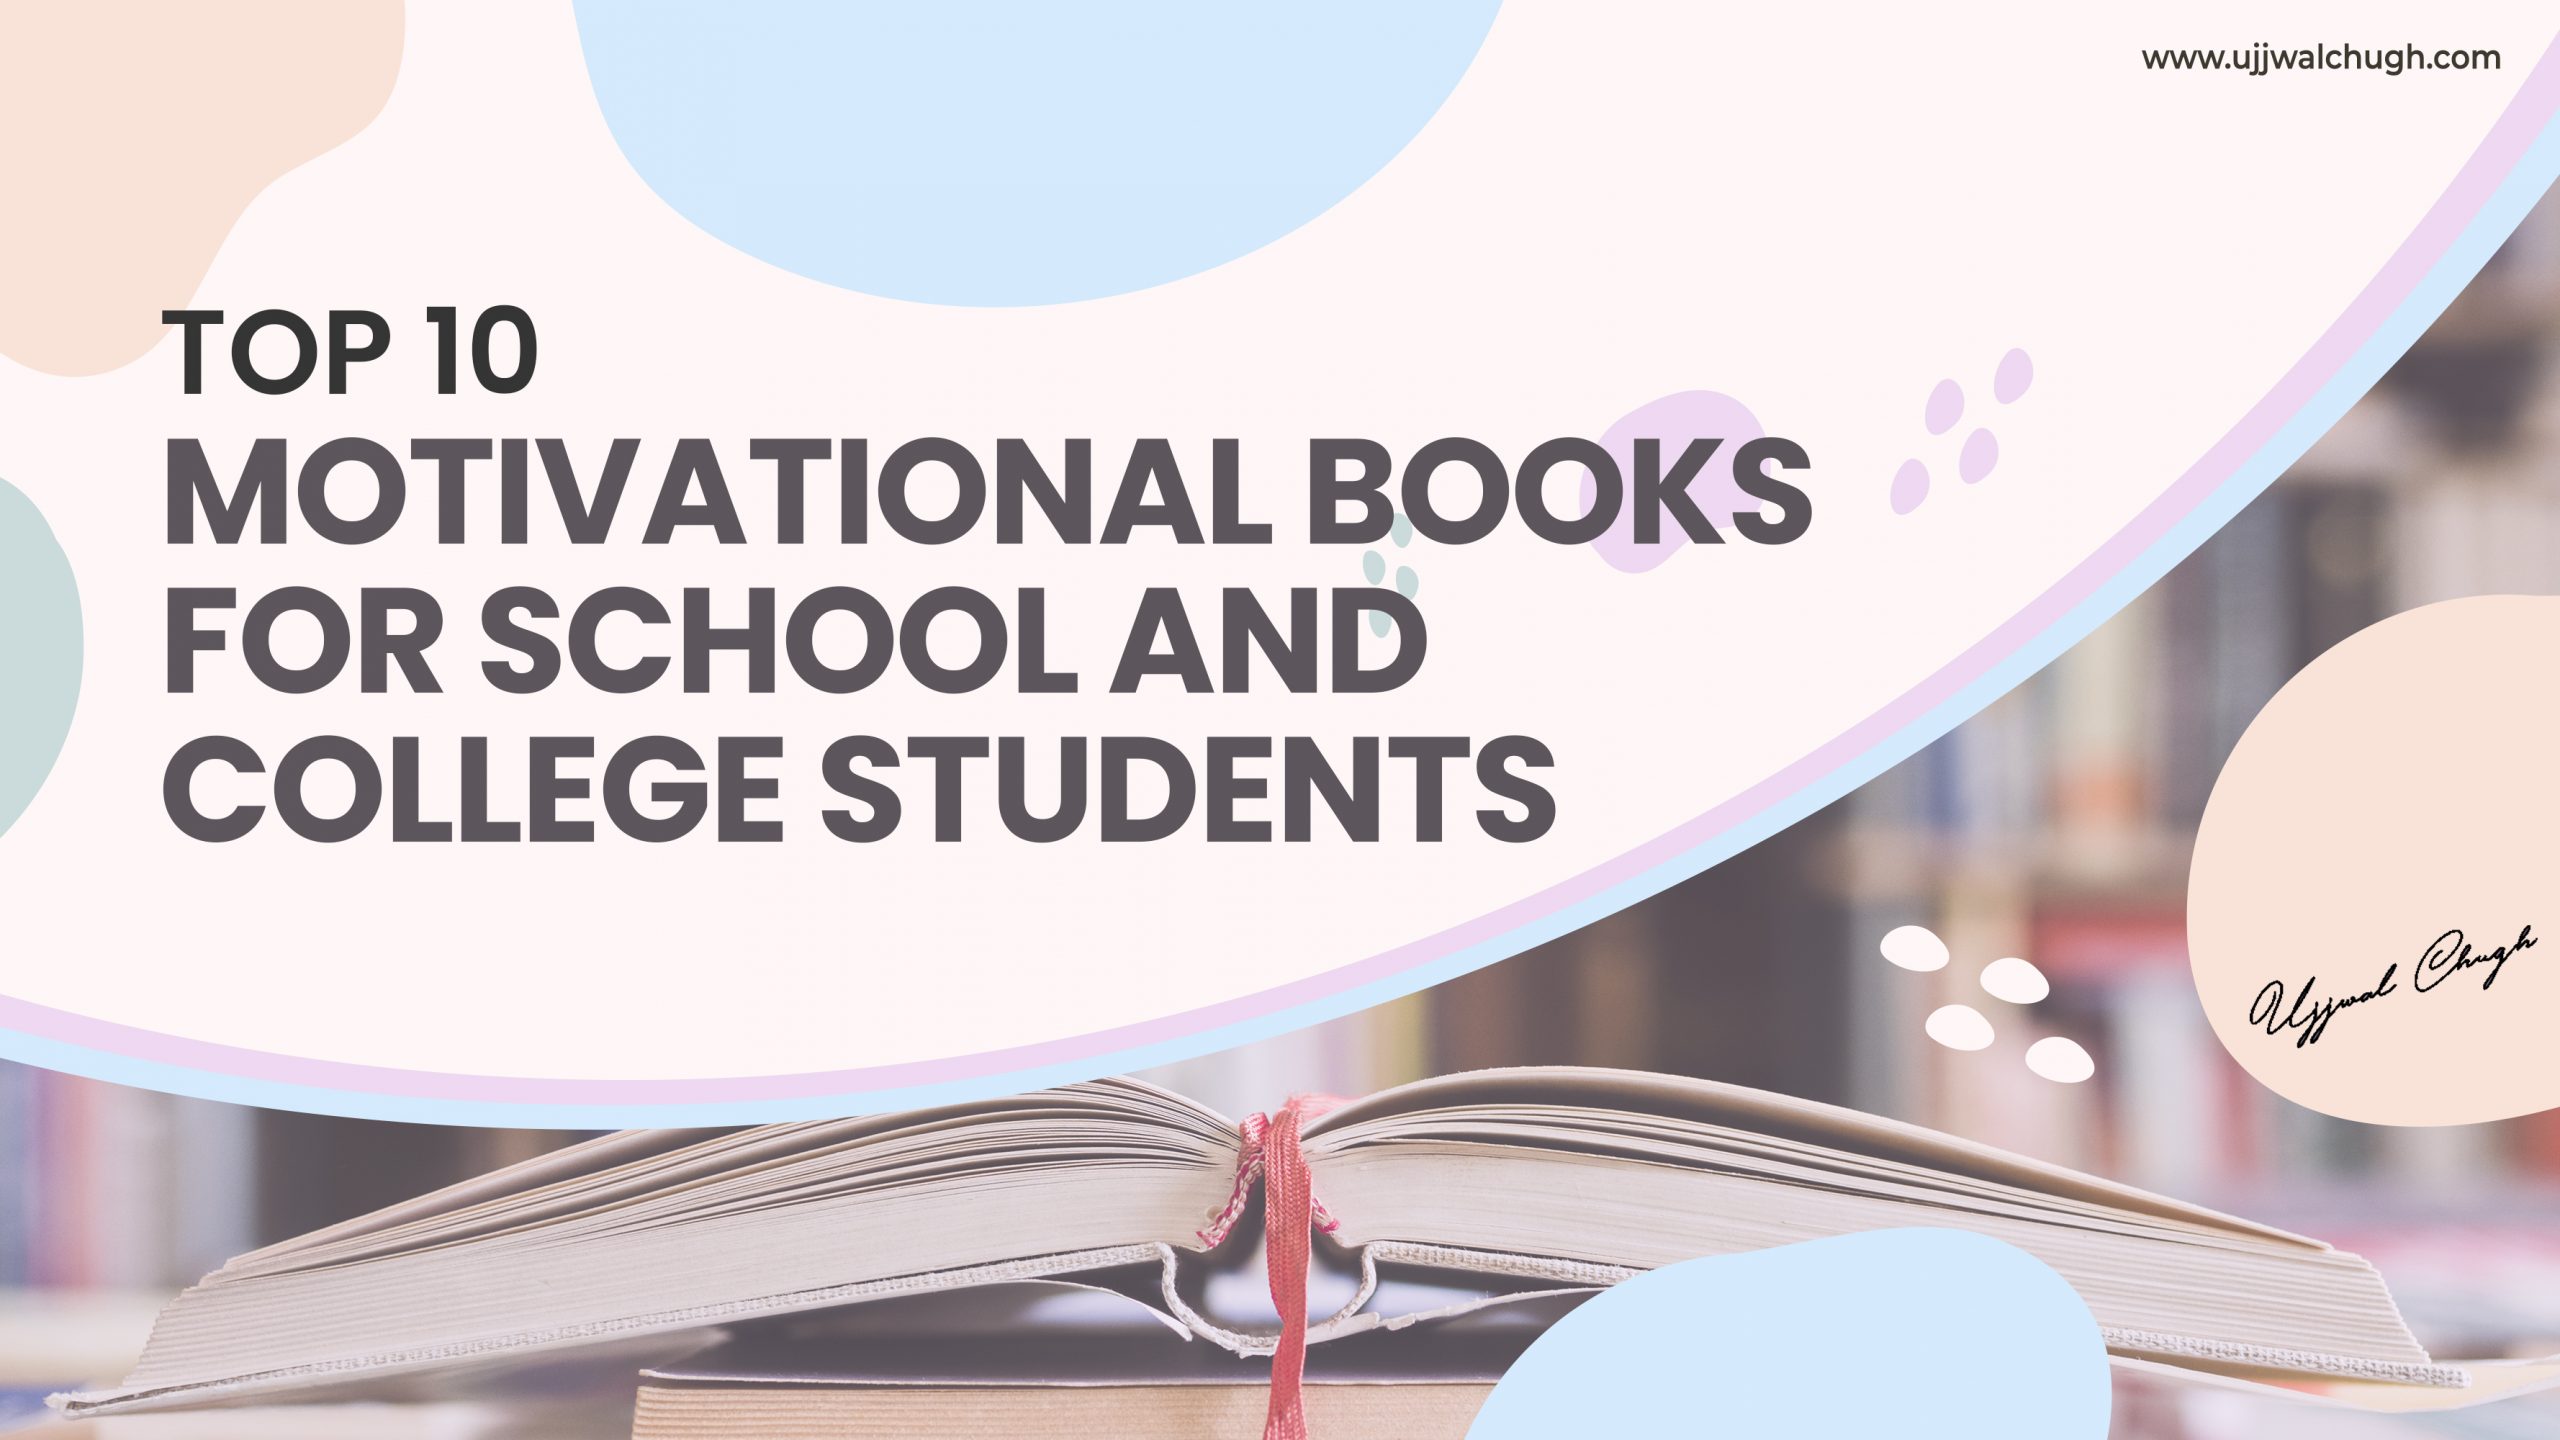 Top 10 Motivational Books For School Students & College Students | Best Inspirational Books For Success